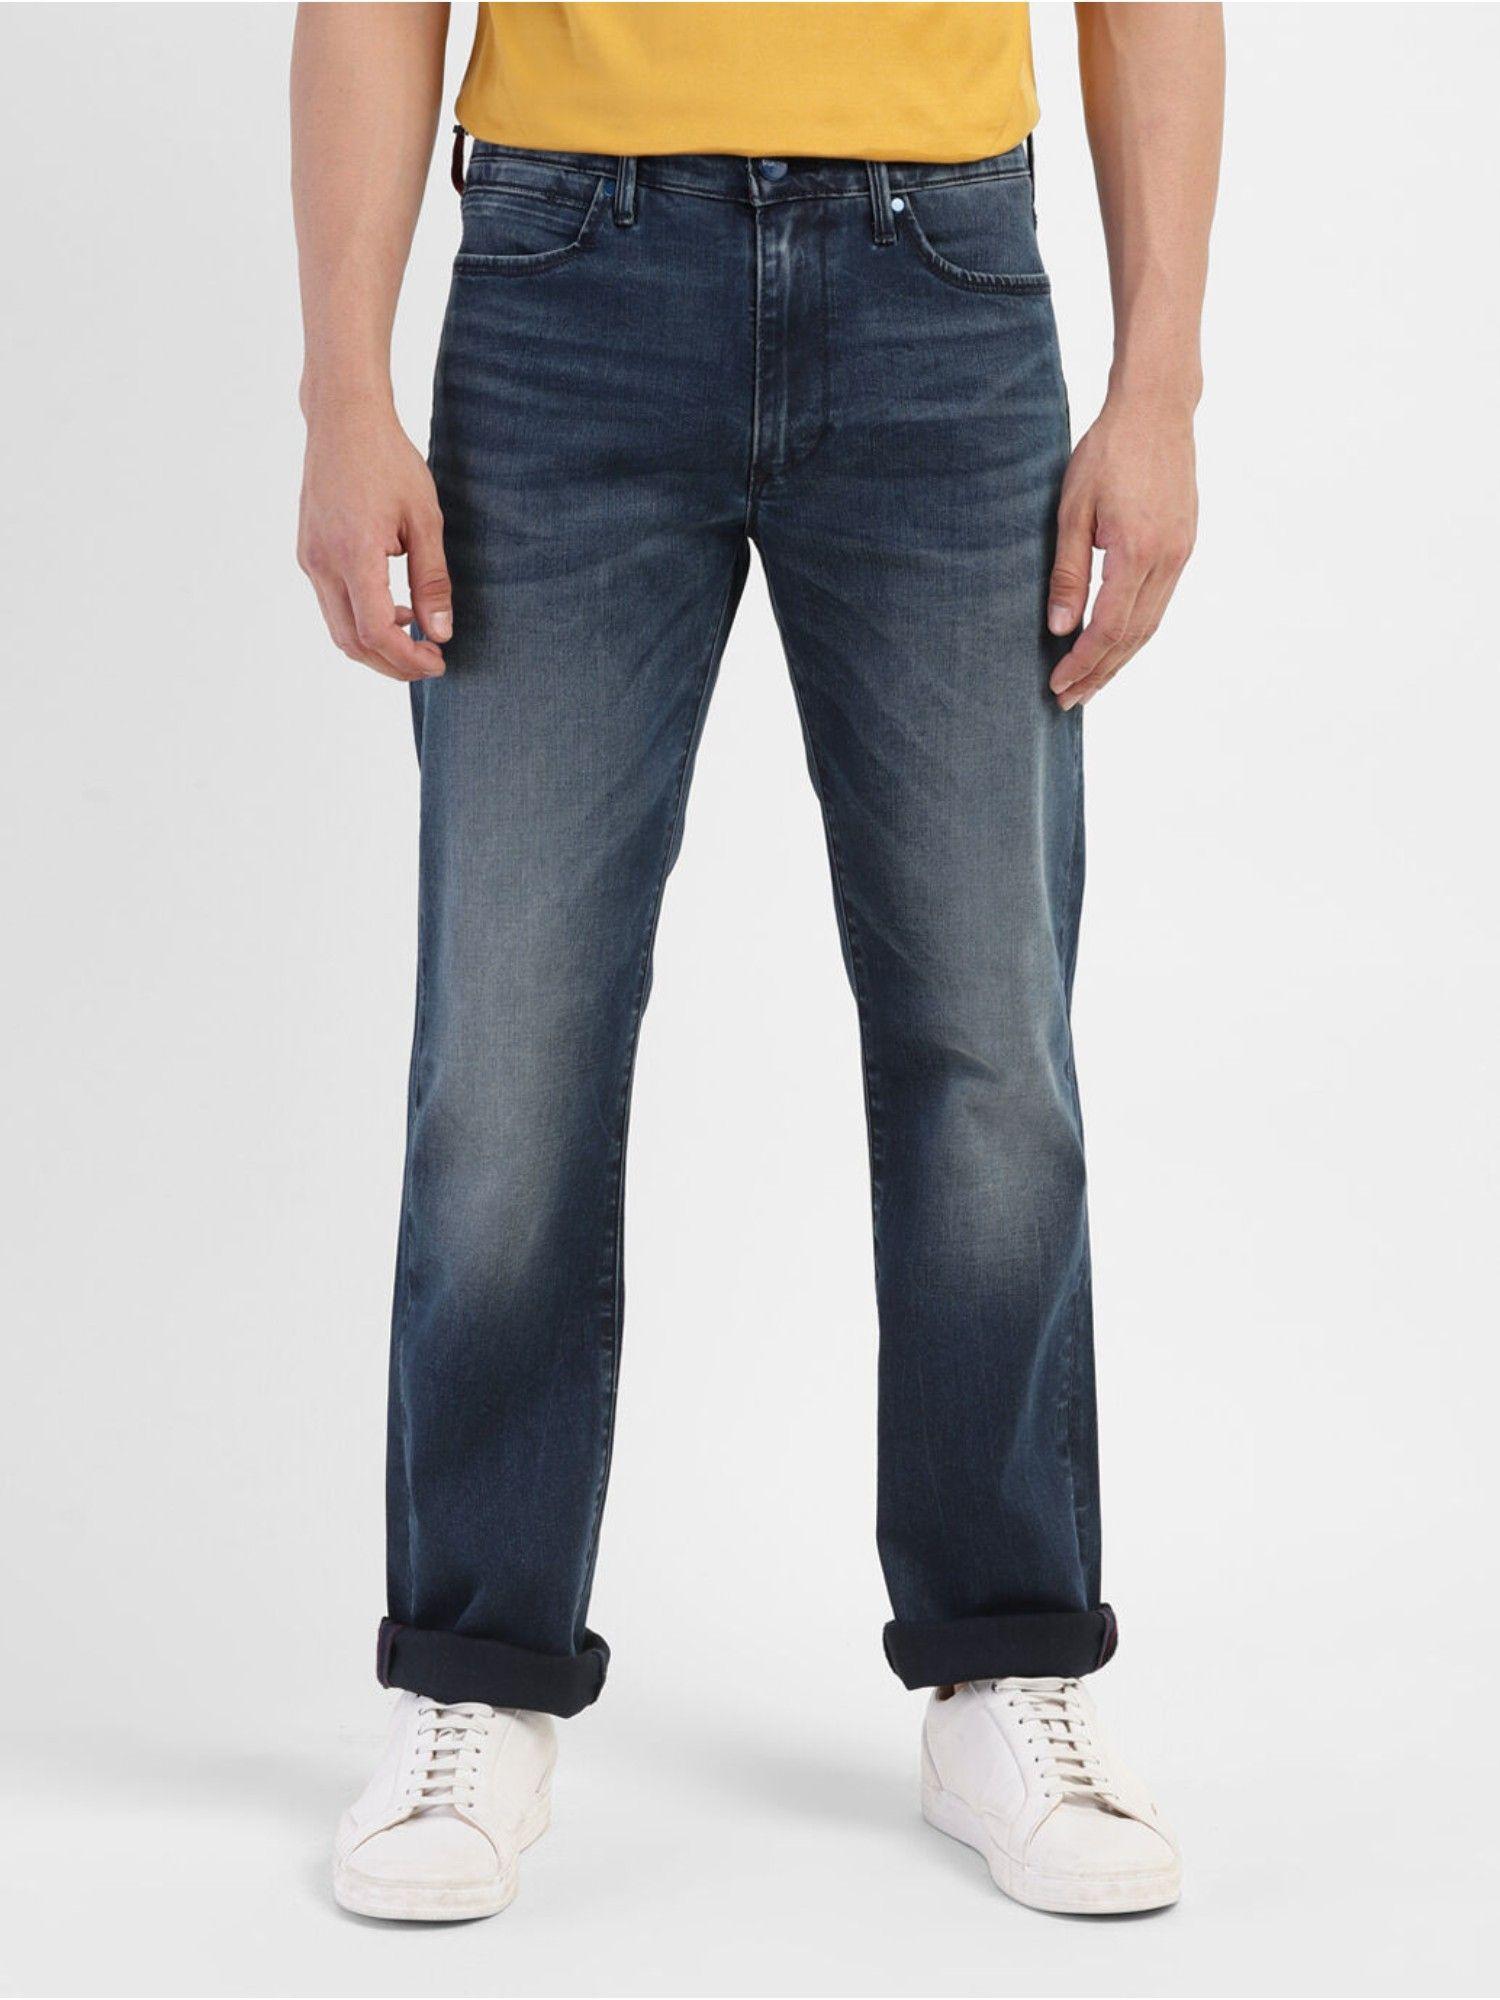 mens 513 blue straight fit jeans